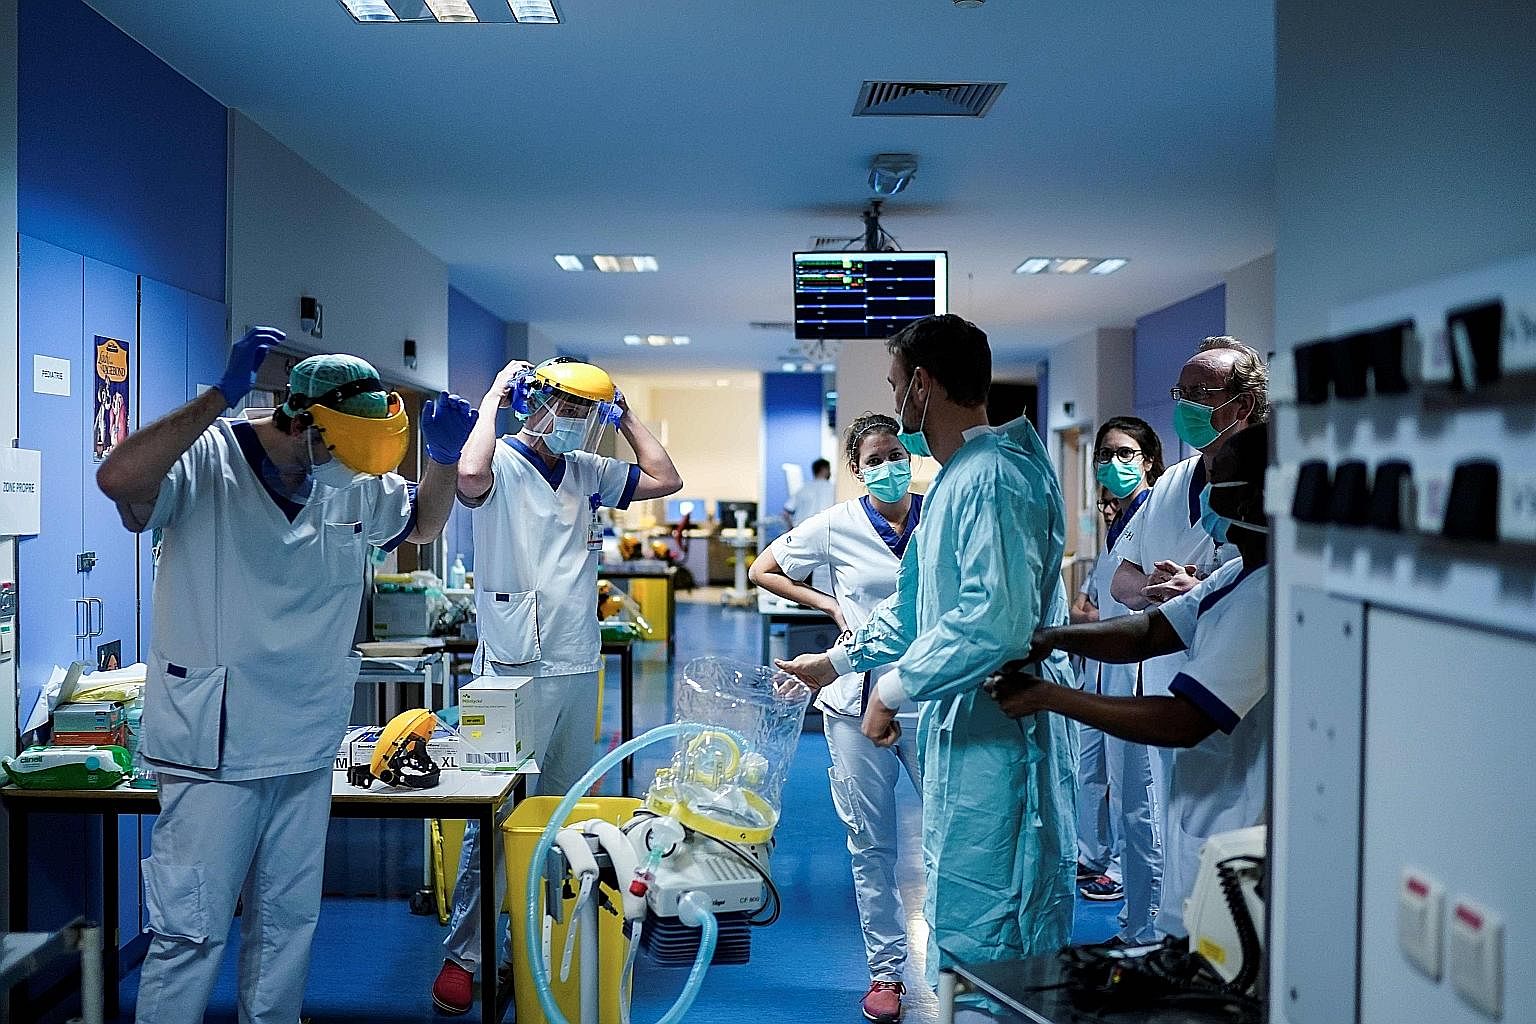 Medical staff putting on protective gear last Friday before treating Covid-19 patients at the Erasme Hospital in Brussels. The adoption of a road map for the global community is vital because there will be another outbreak in the future, perhaps more